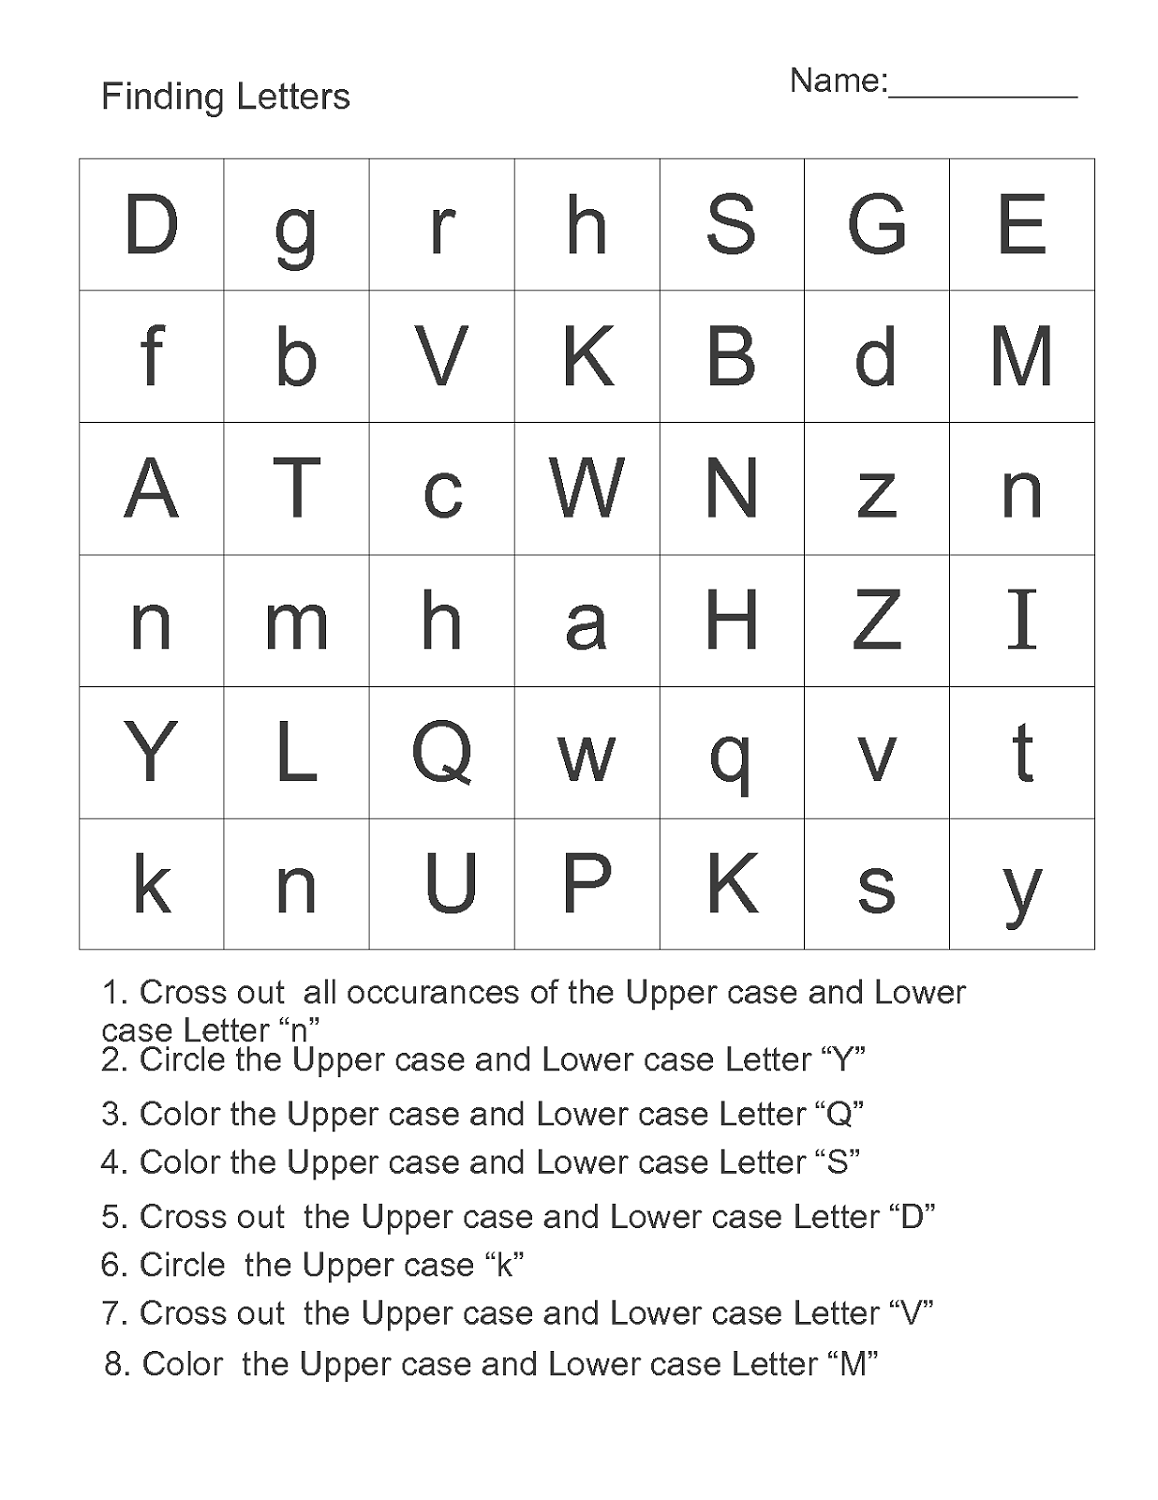 complete-the-alphabet-worksheets